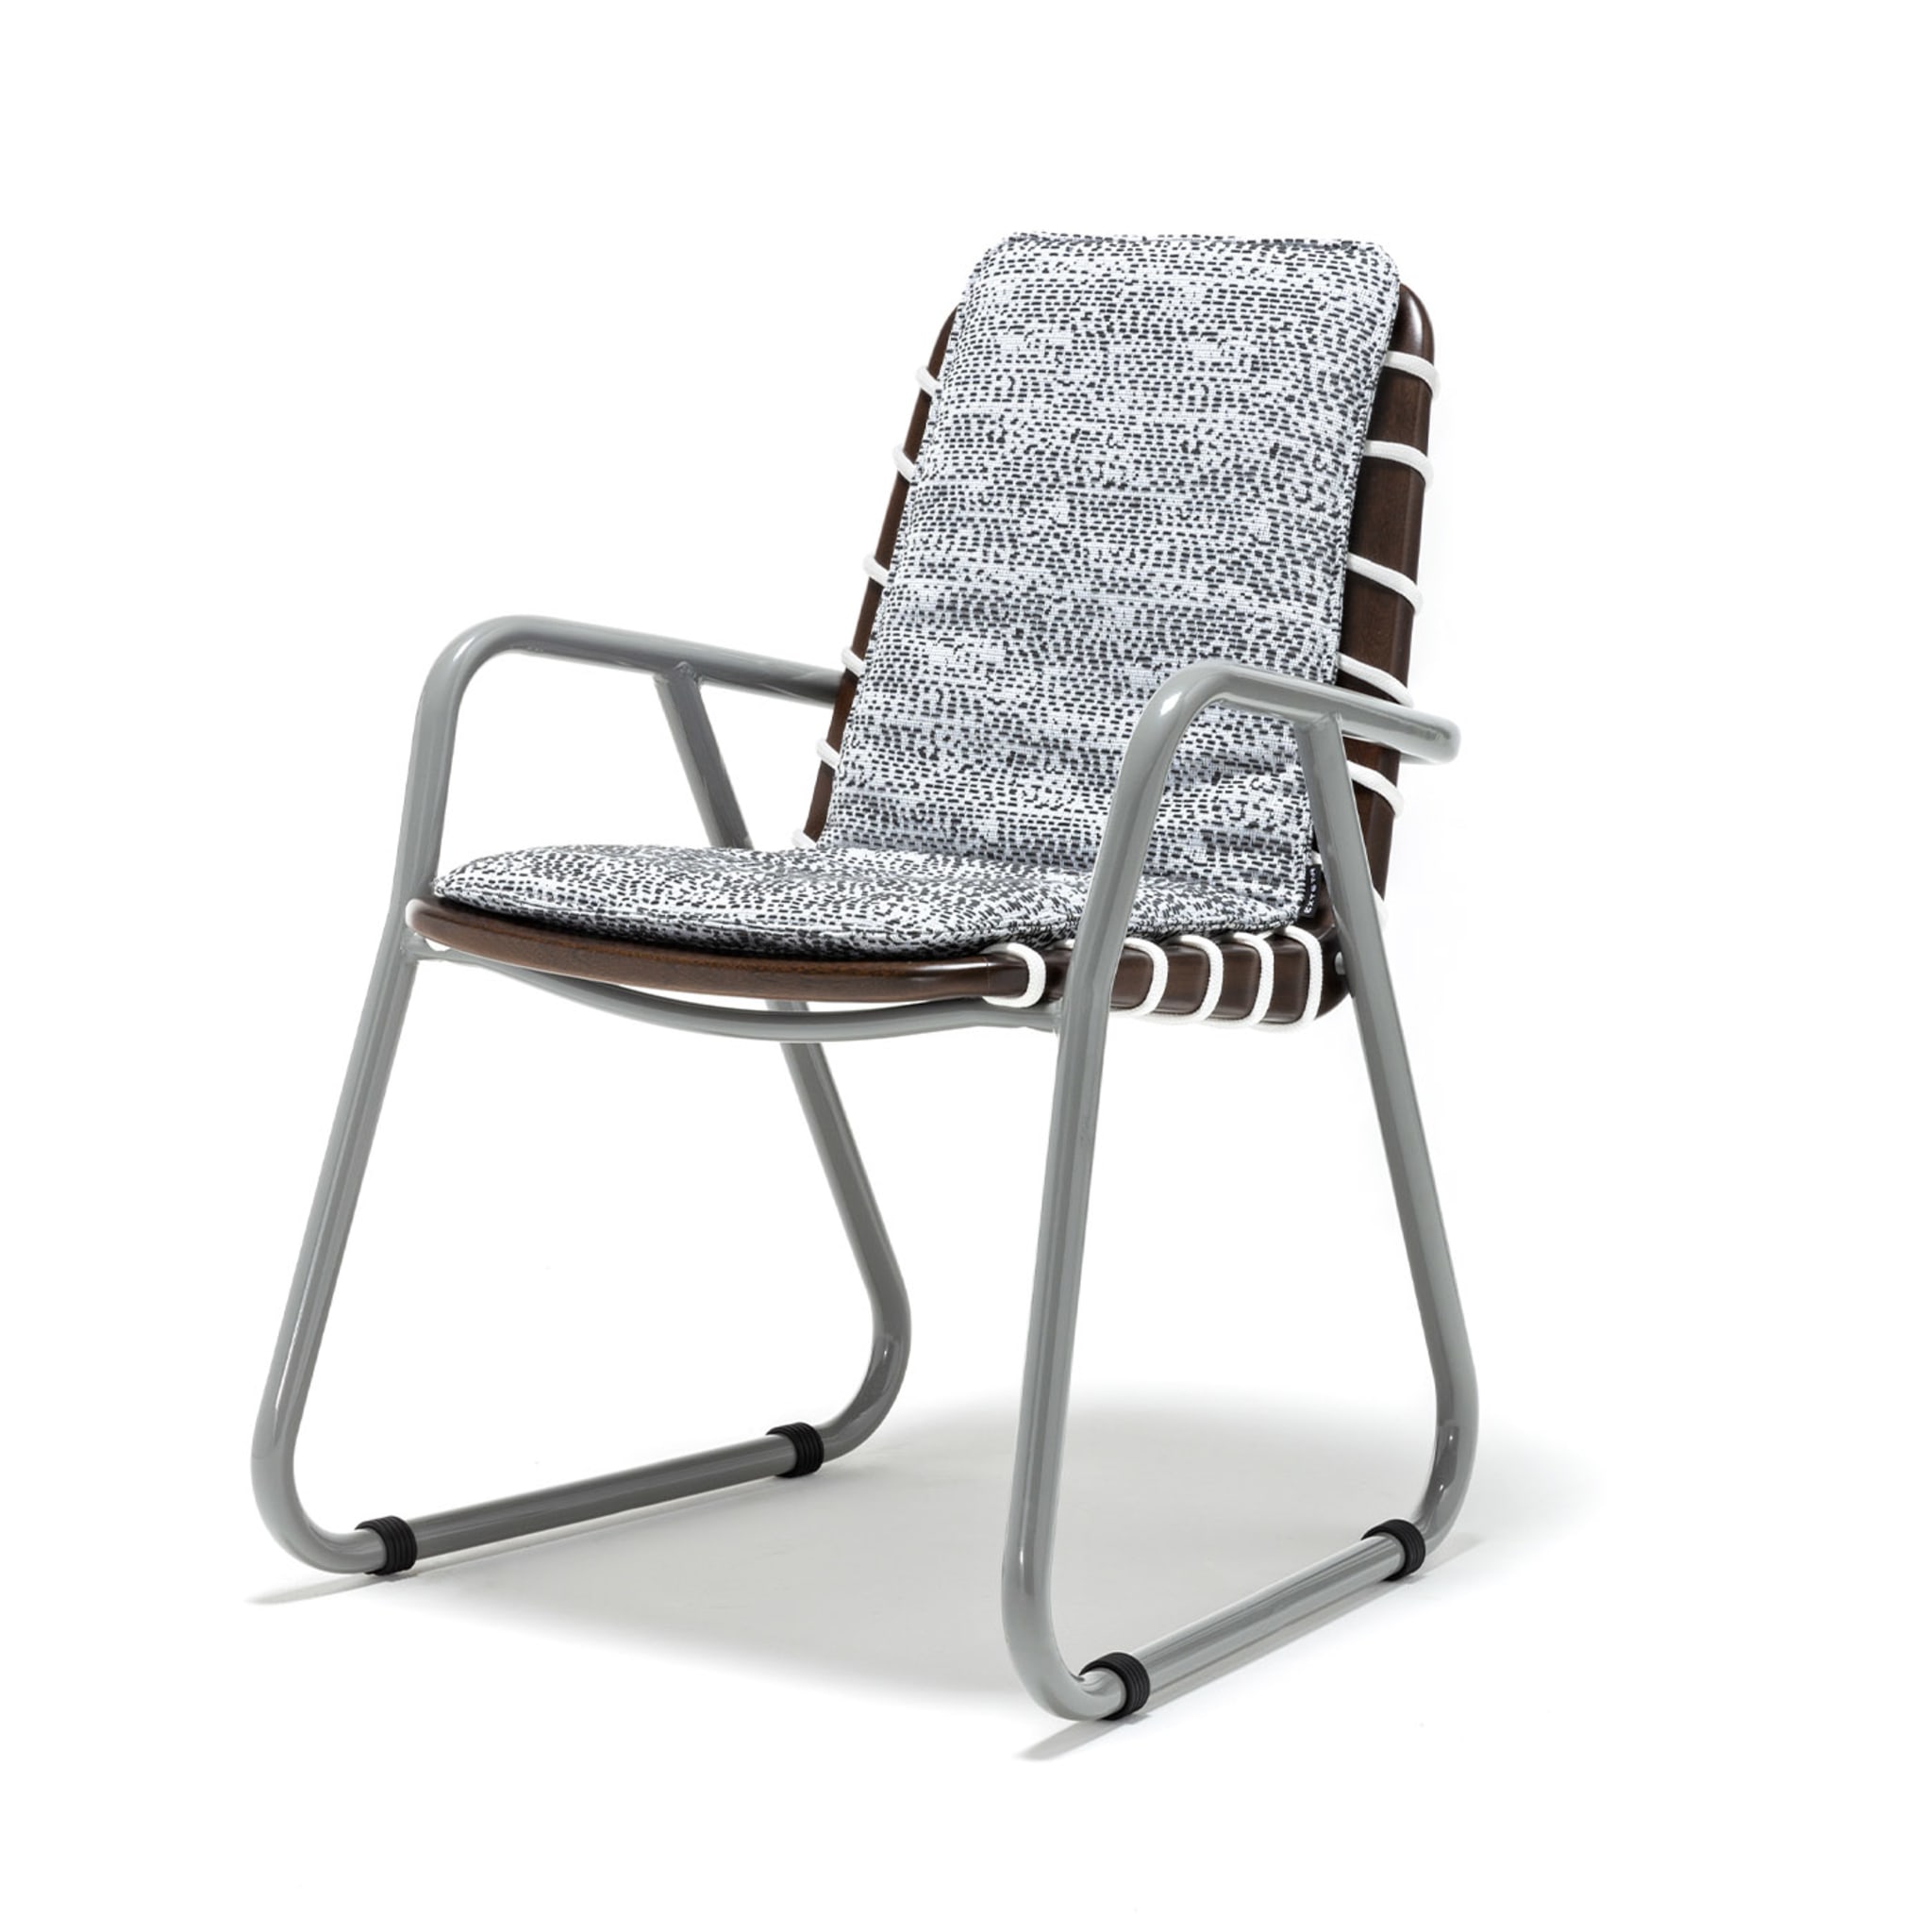 Sunset Black-And-White Dining Armchair by Paola Navone - Alternative view 1